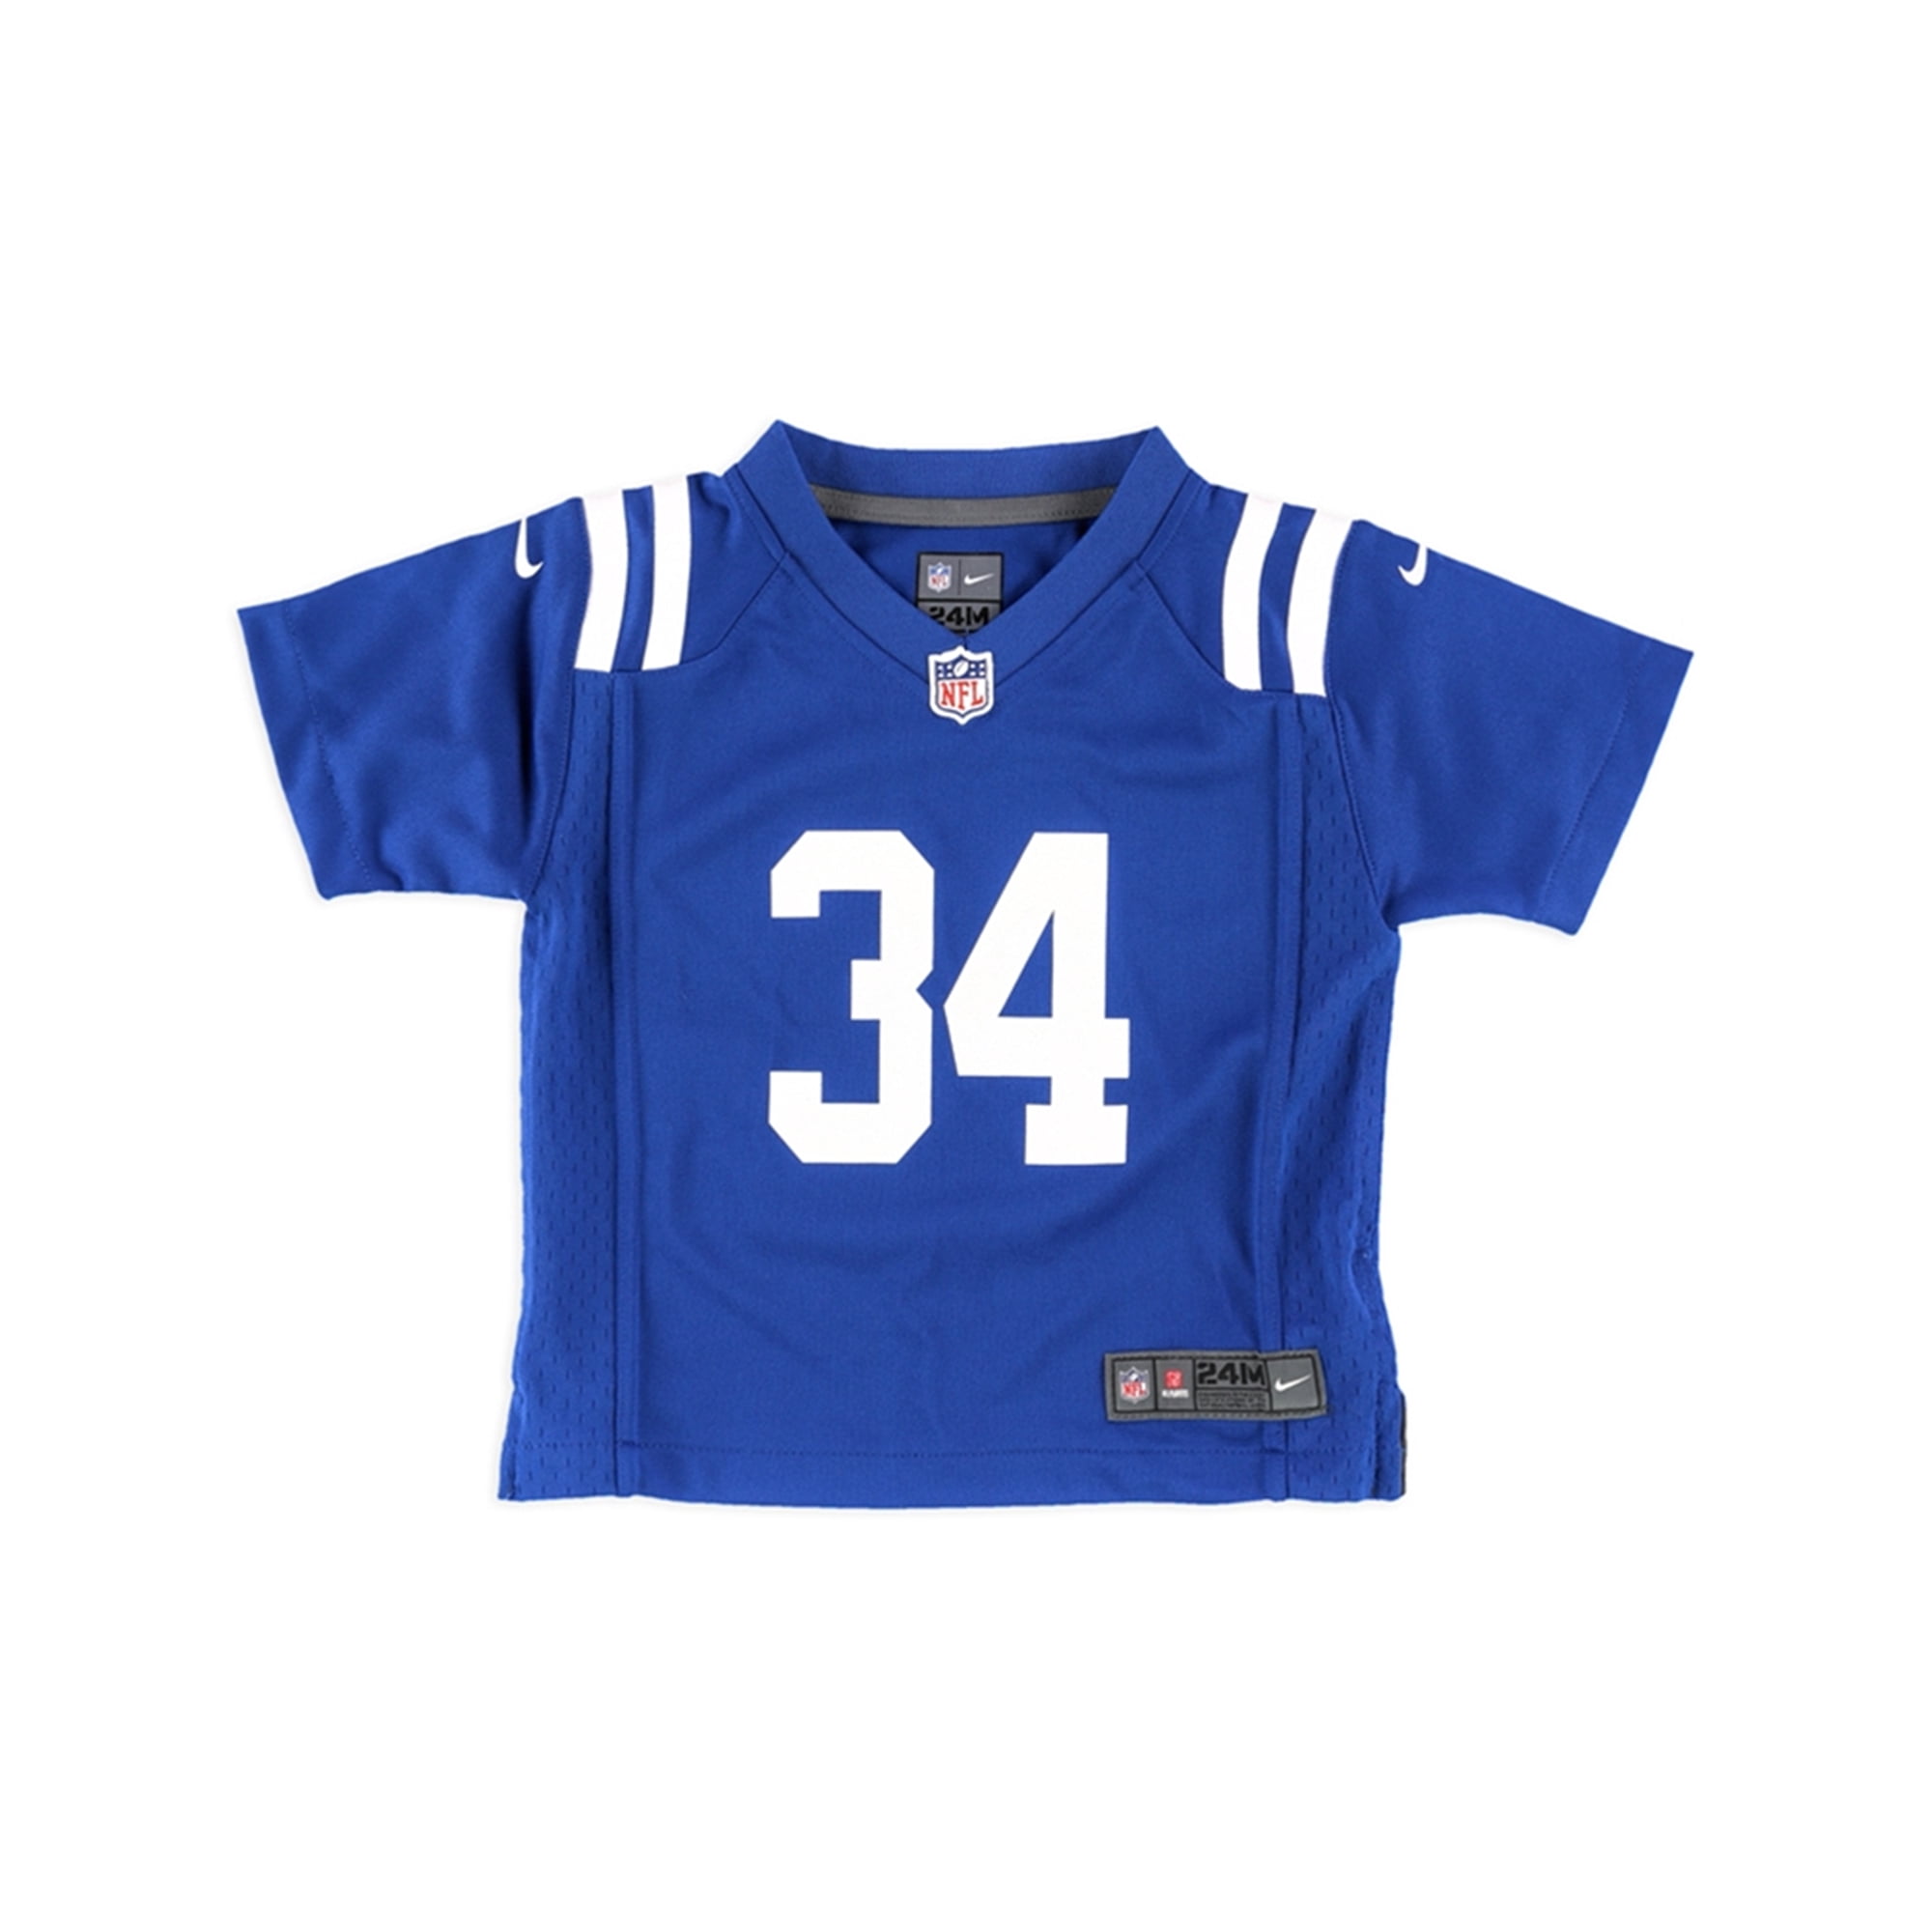 NFL Boys Colts 34 Jersey Graphic T-Shirt, Blue, 24 mos 